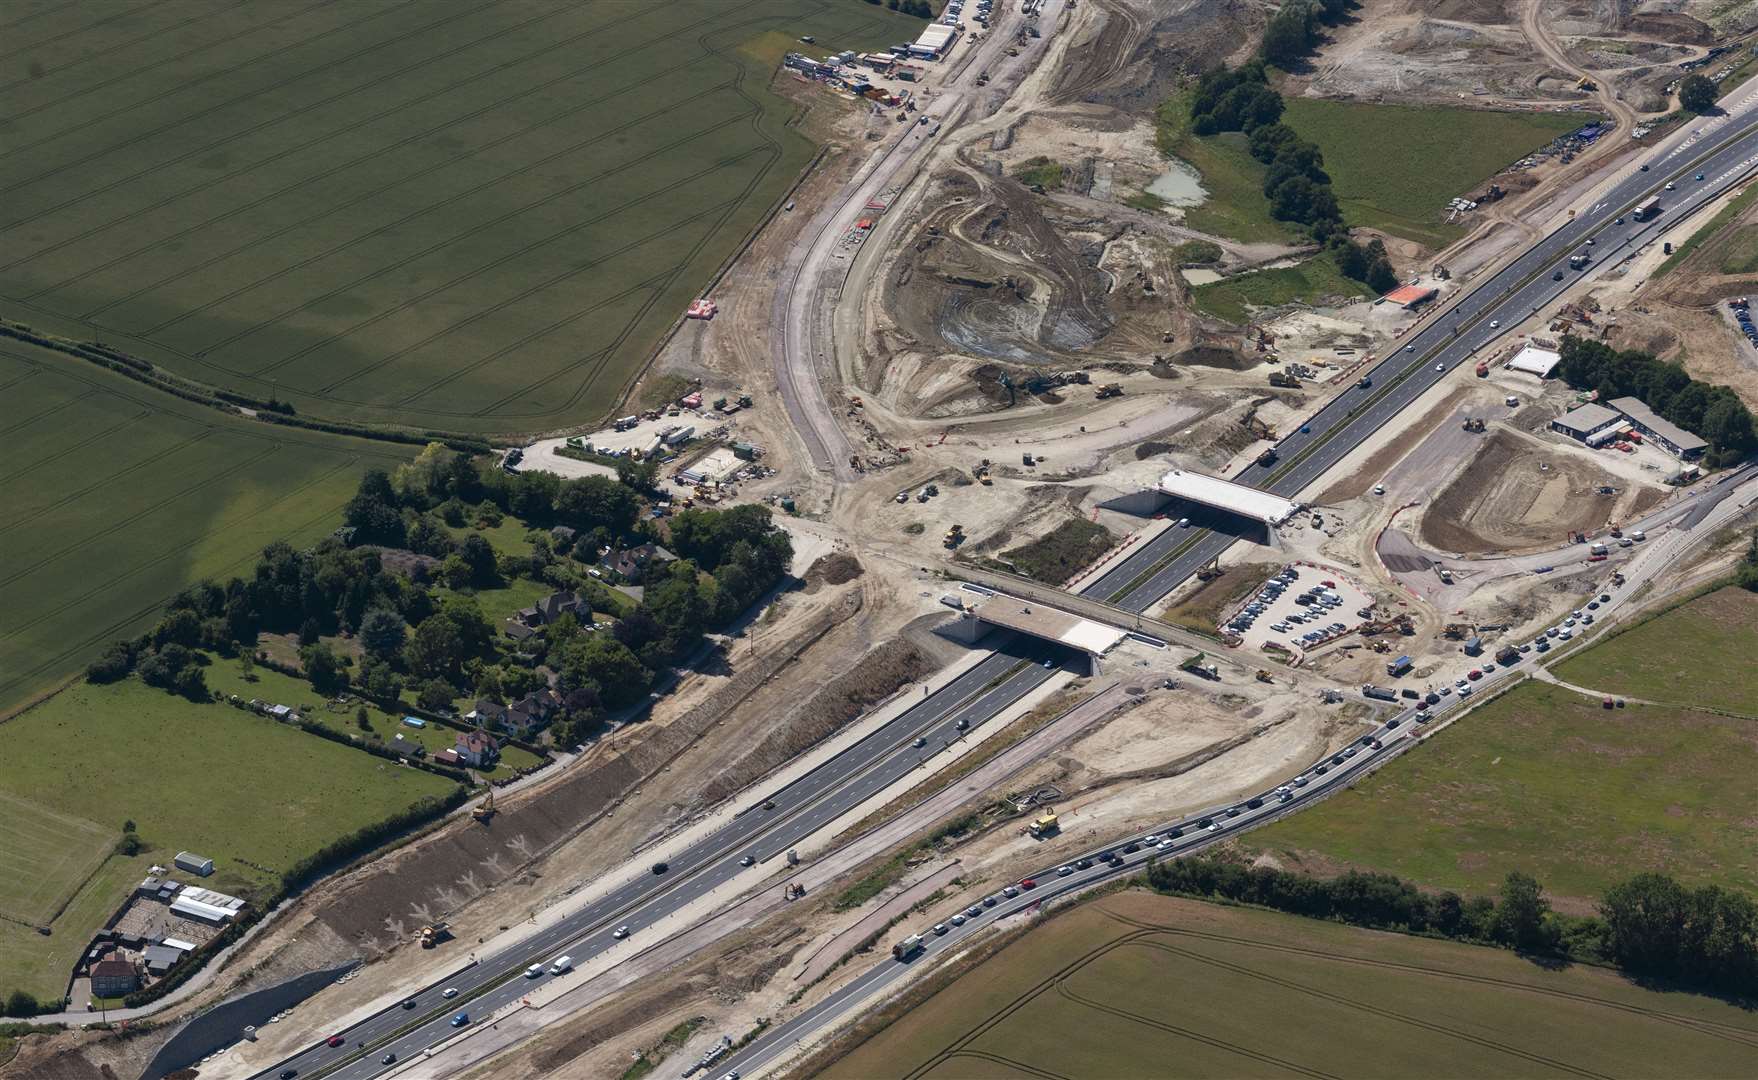 The new bridges which will form Junction 10a were put in earlier this year. In this photo, traffic can be seen queuing on the A20 where temporary traffic lights have sparked delays. Picture: Ady Kerry / Ashford Borough Council